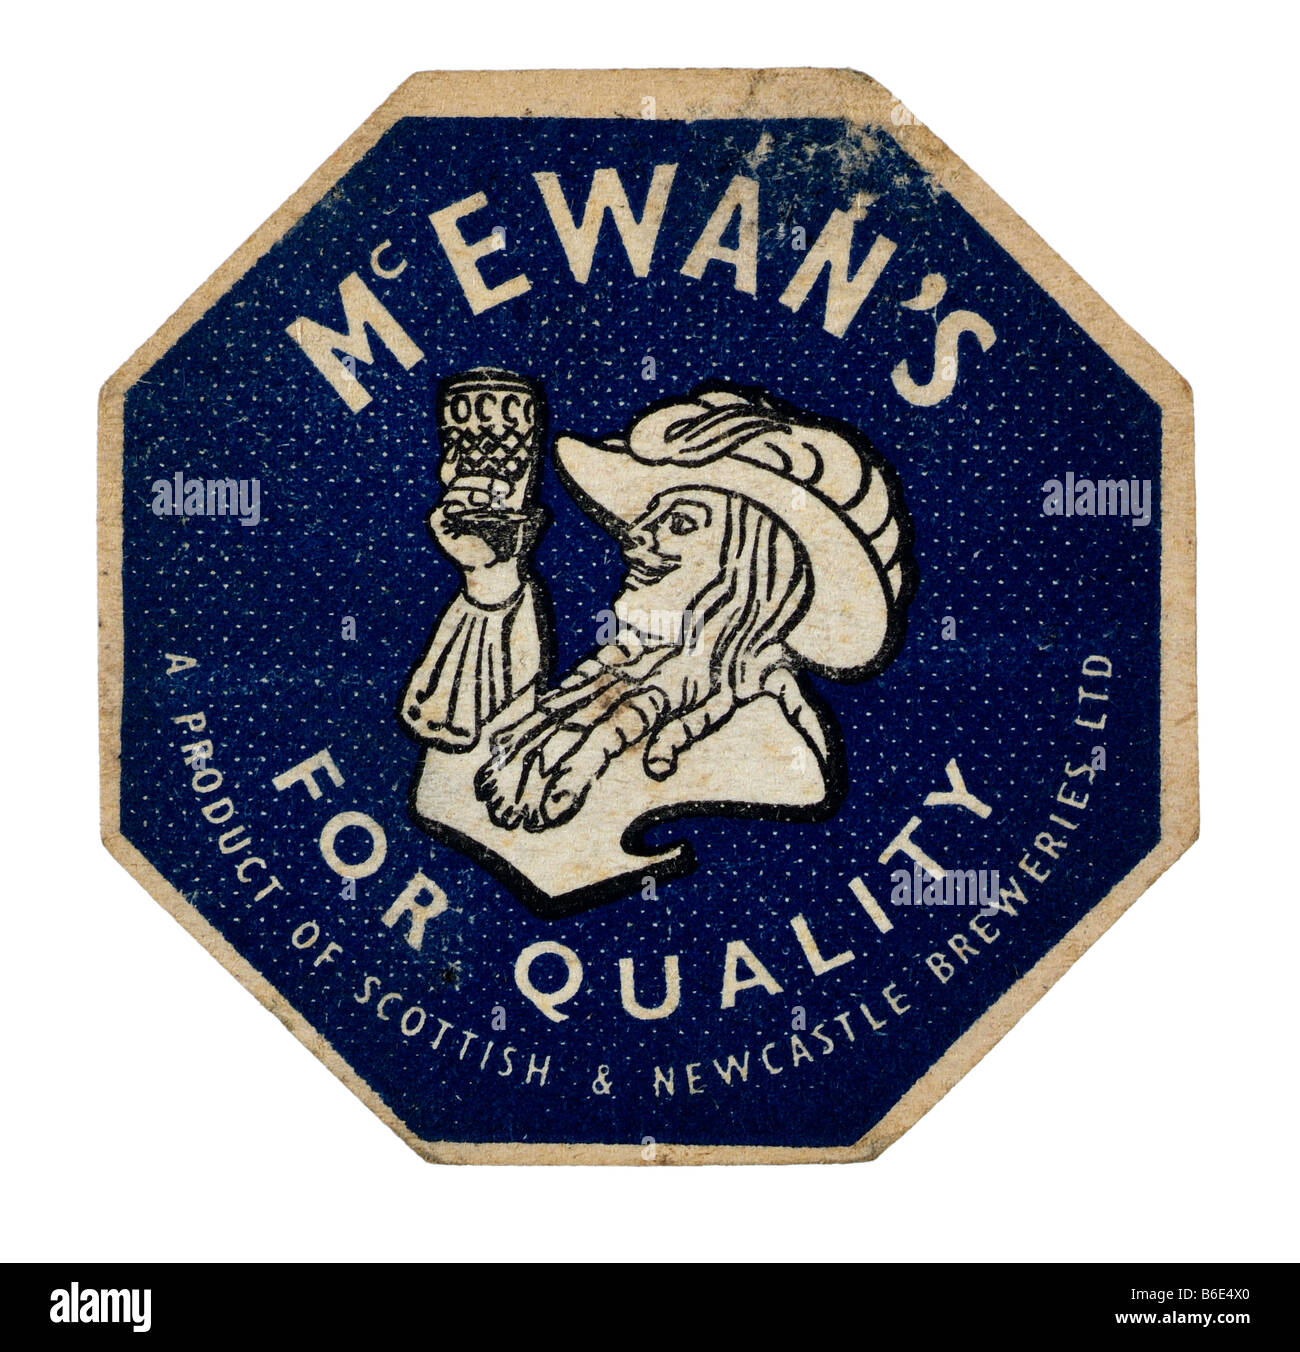 mcewan's for quality a product of scottish newcastle breweries ltd Stock Photo